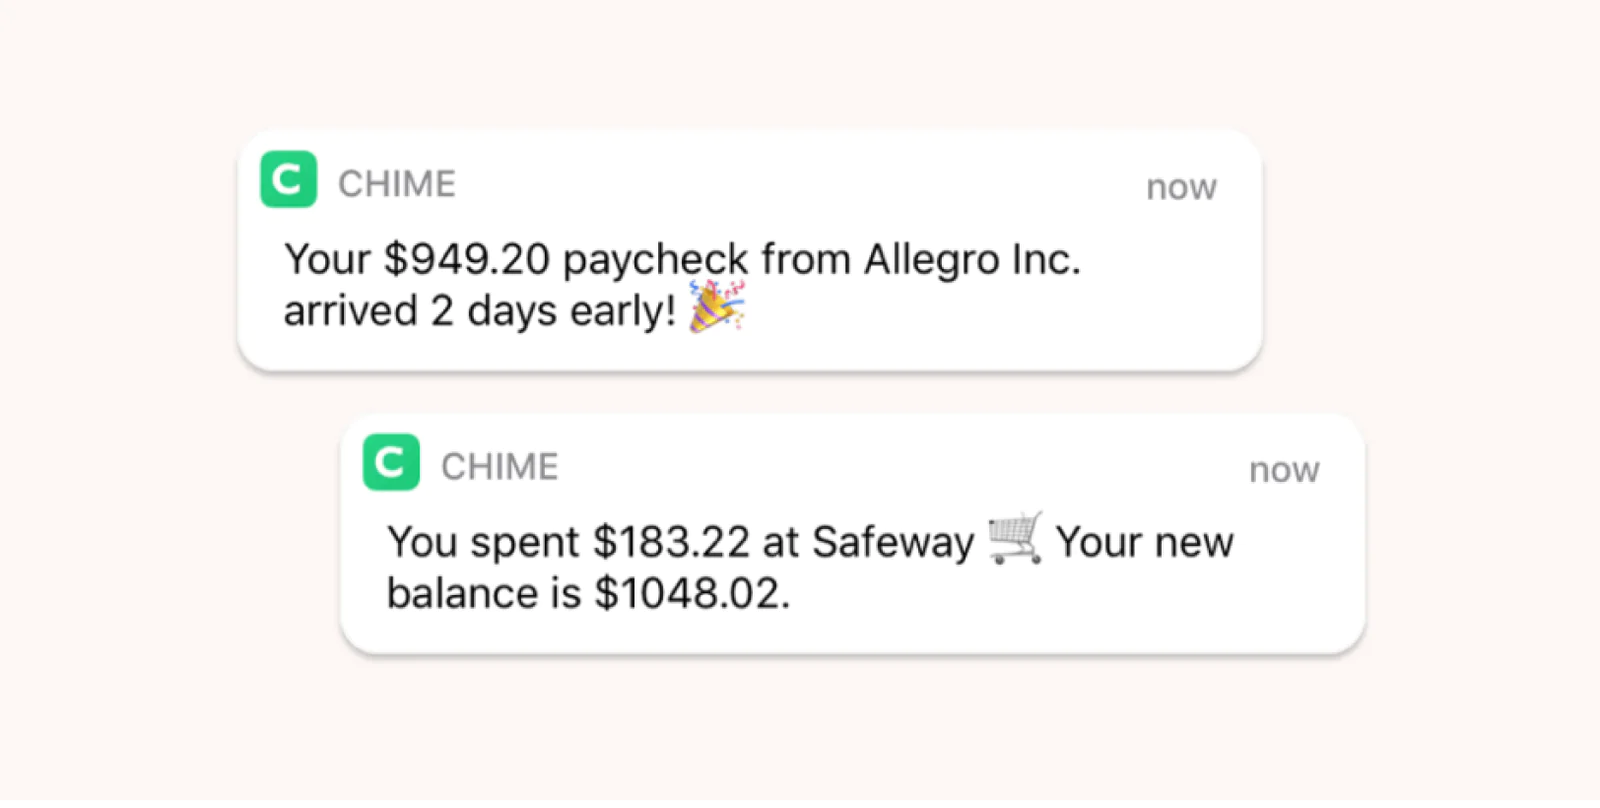 chime notification system powered by Twilio showing balance updates on the recently purchases made